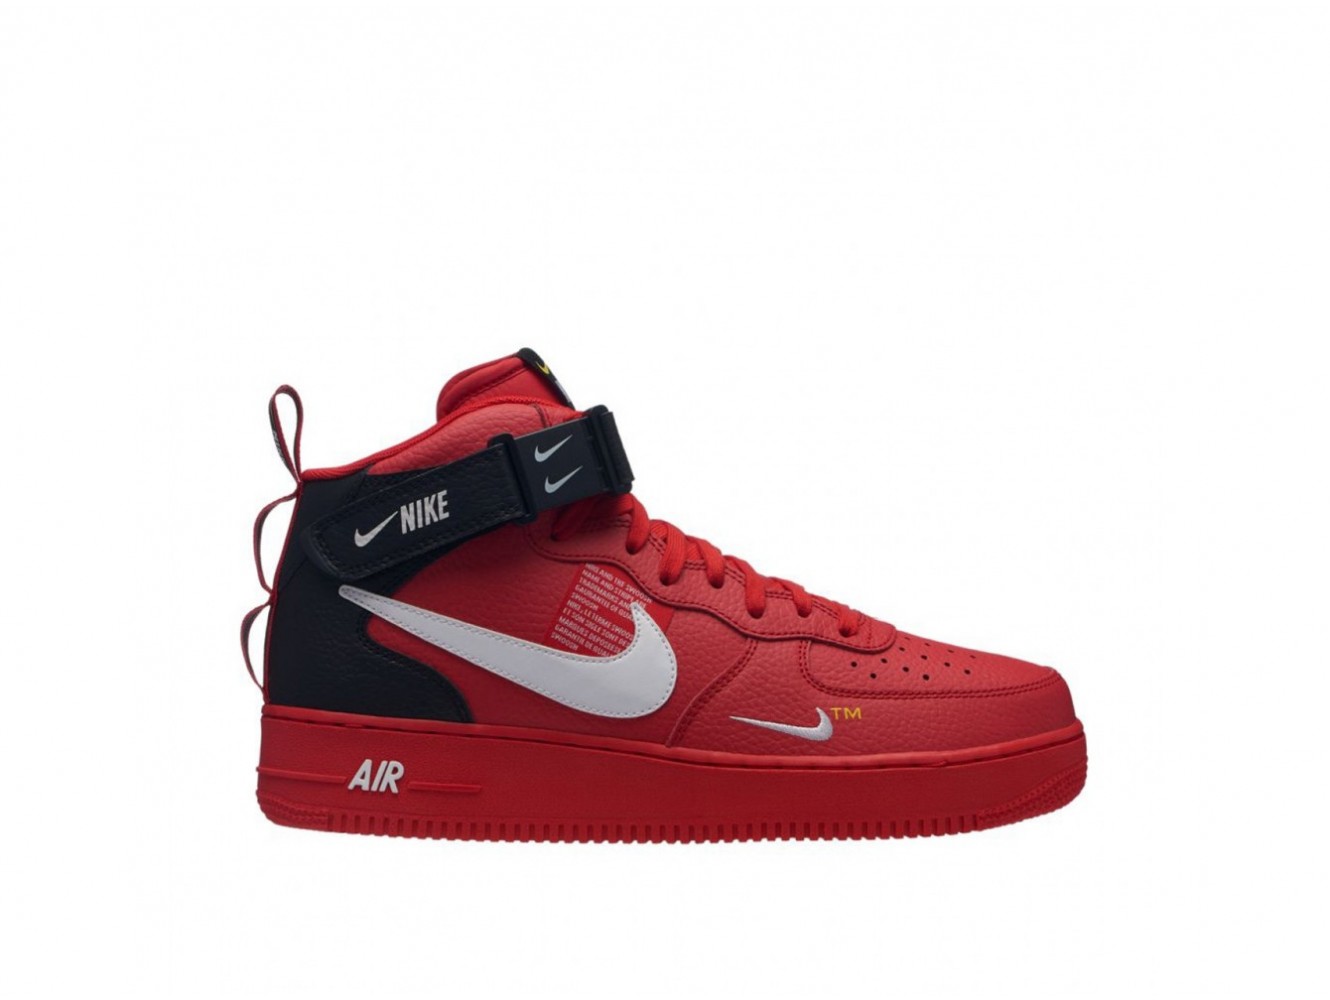 NIKE AIR FORCE 1 MID '07 LV8 (RED) (36 